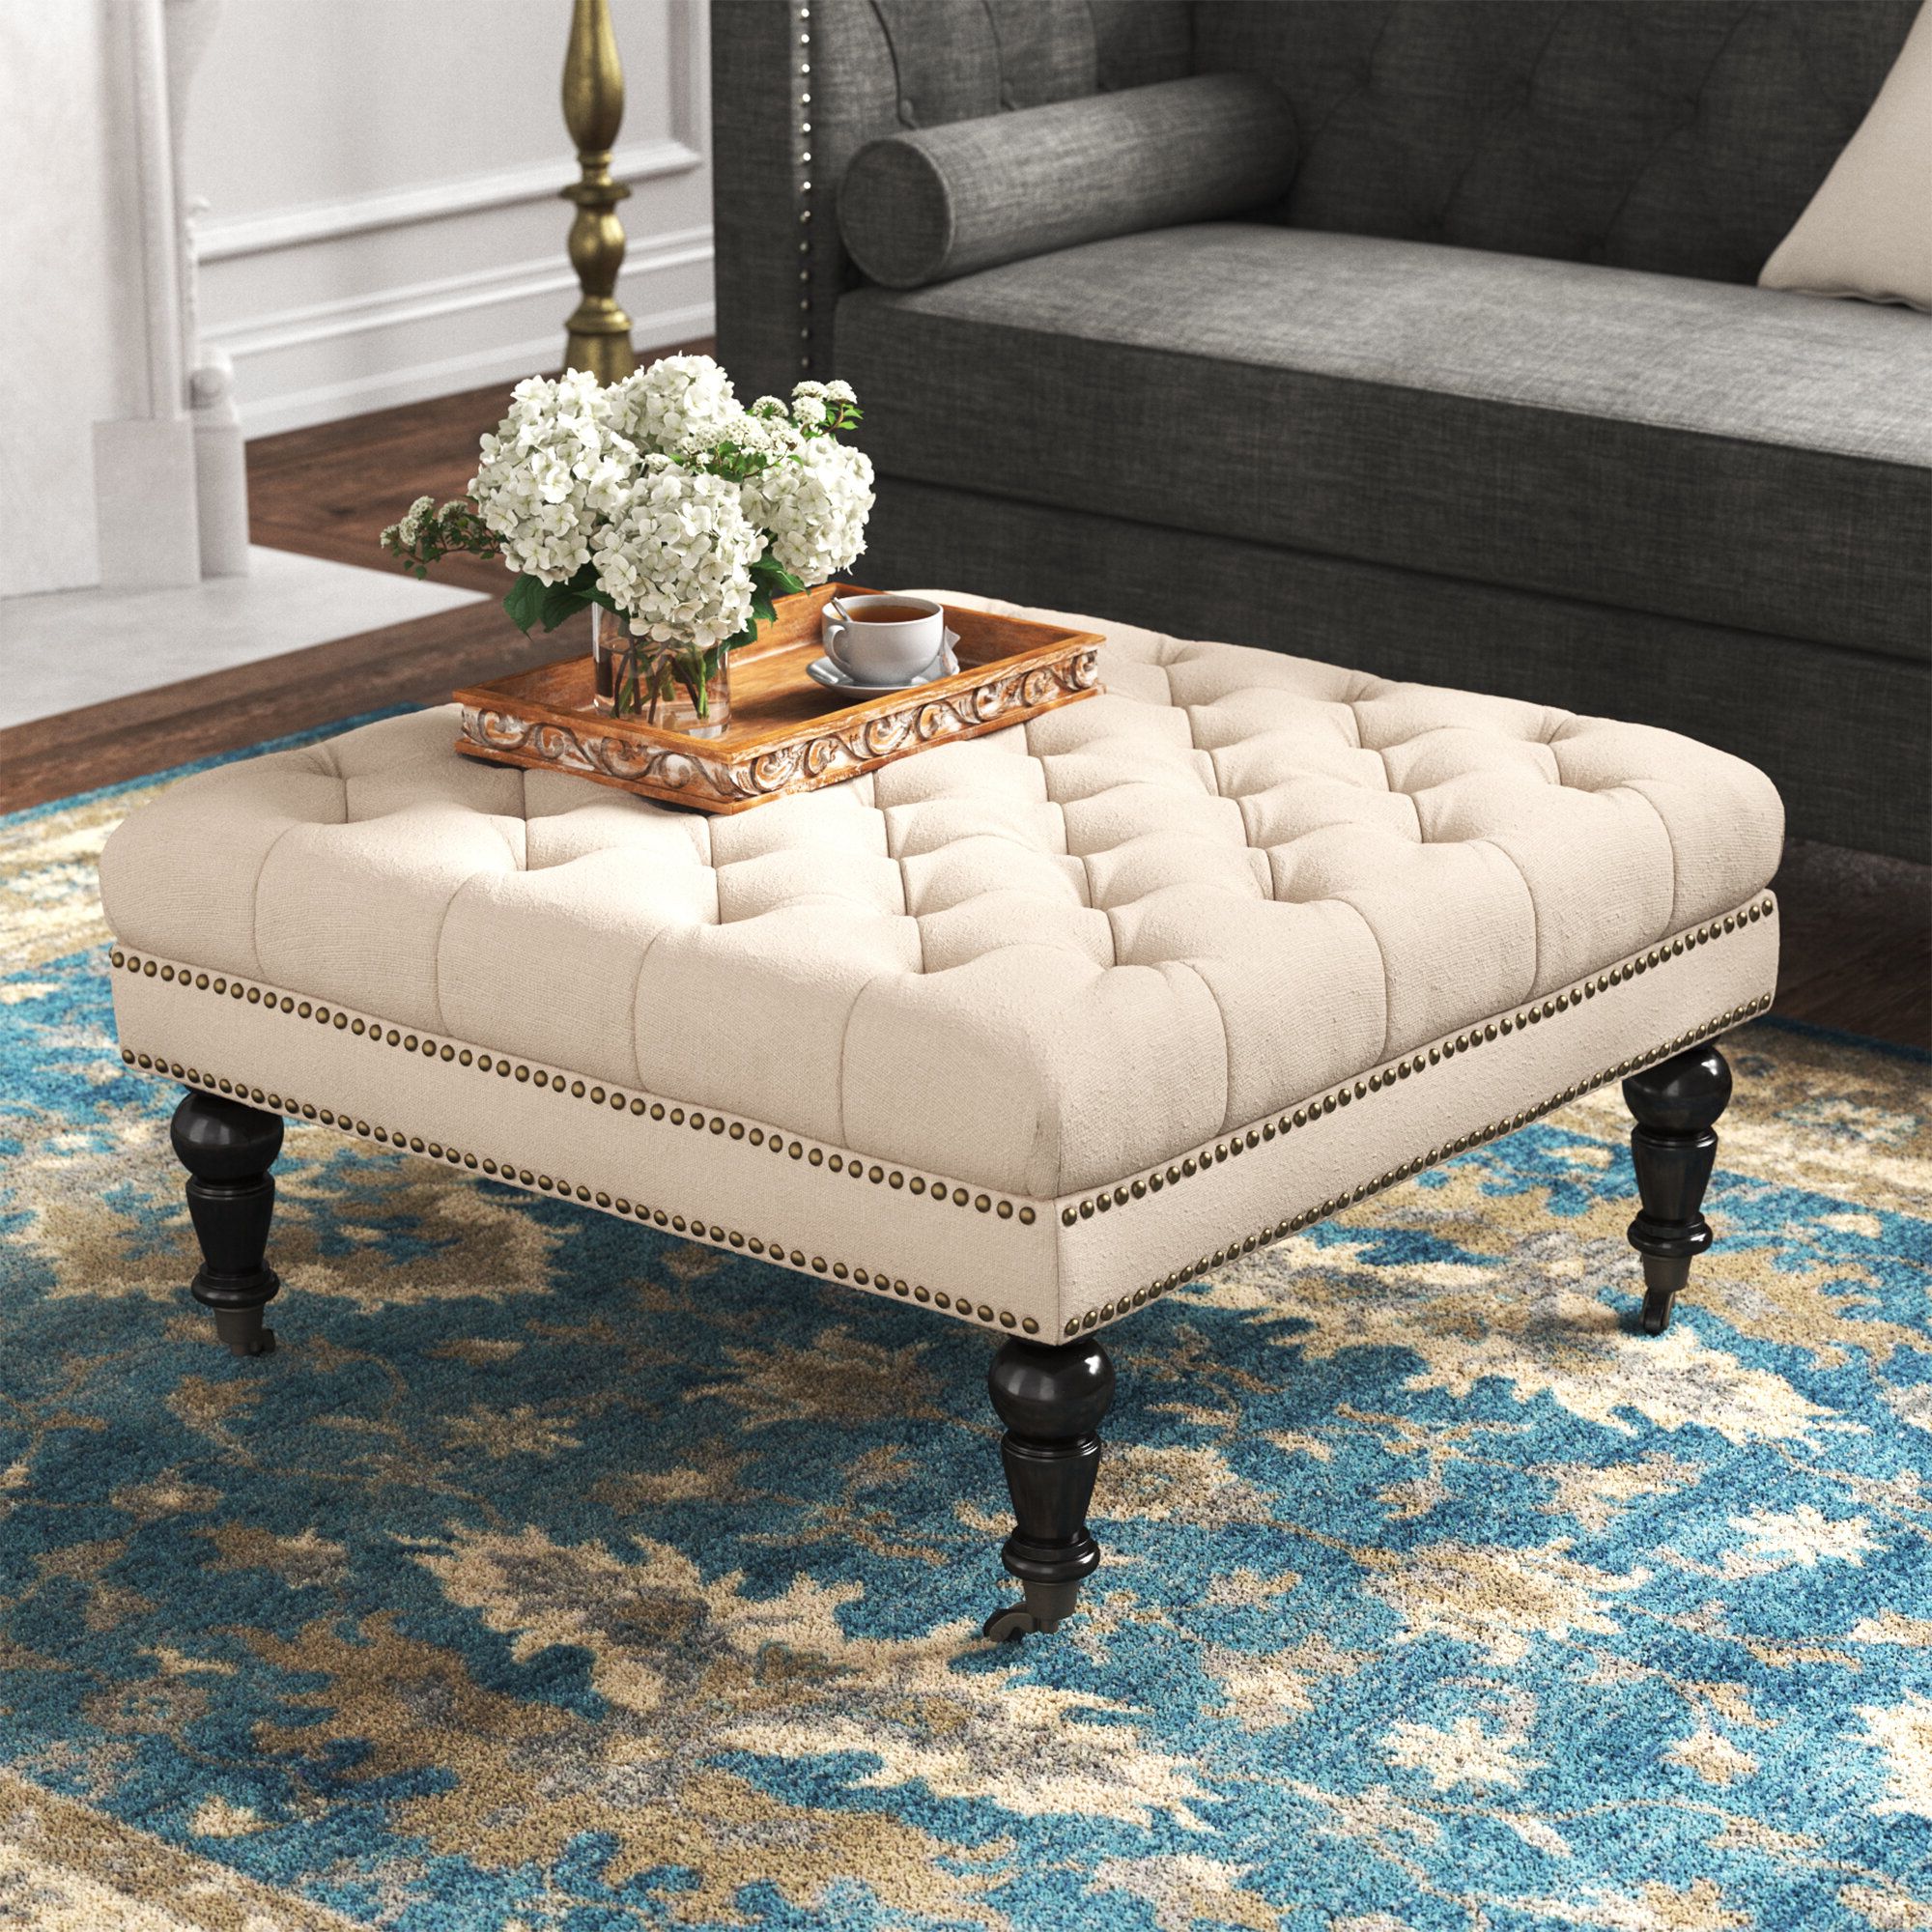 Wayfair Intended For Well Known Square Ottomans (View 7 of 15)